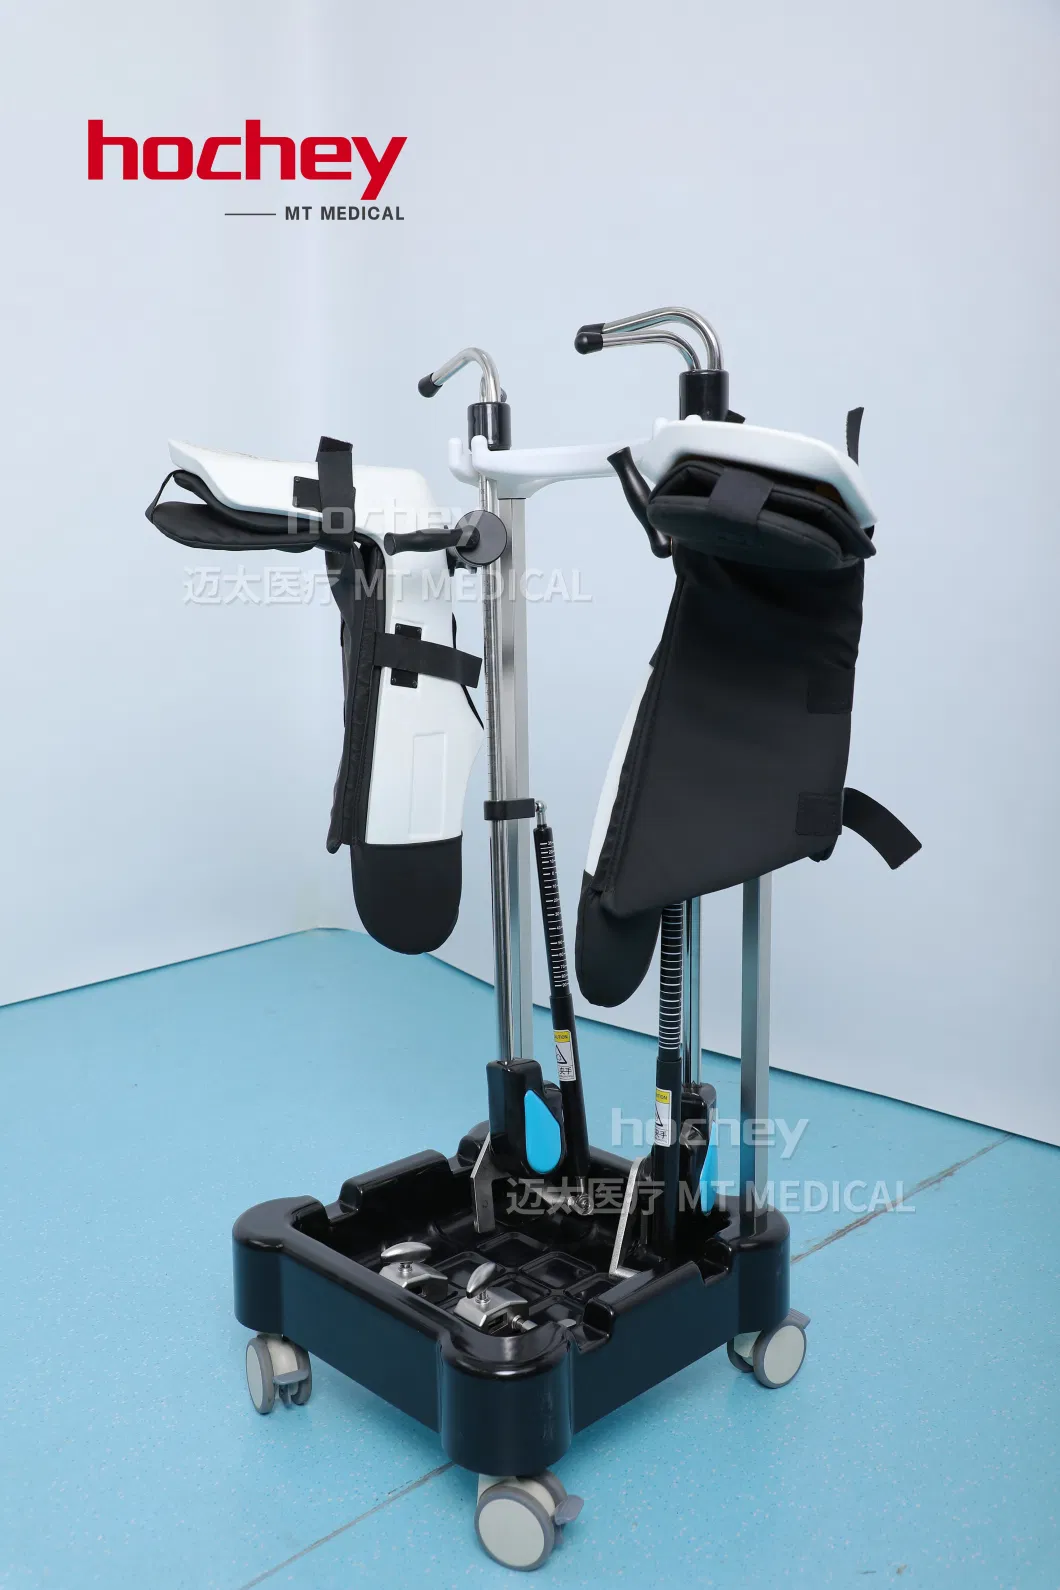 Hochey Medical Stirrups Surgical Position Used Compensated Leg Holder Surgical Instruments